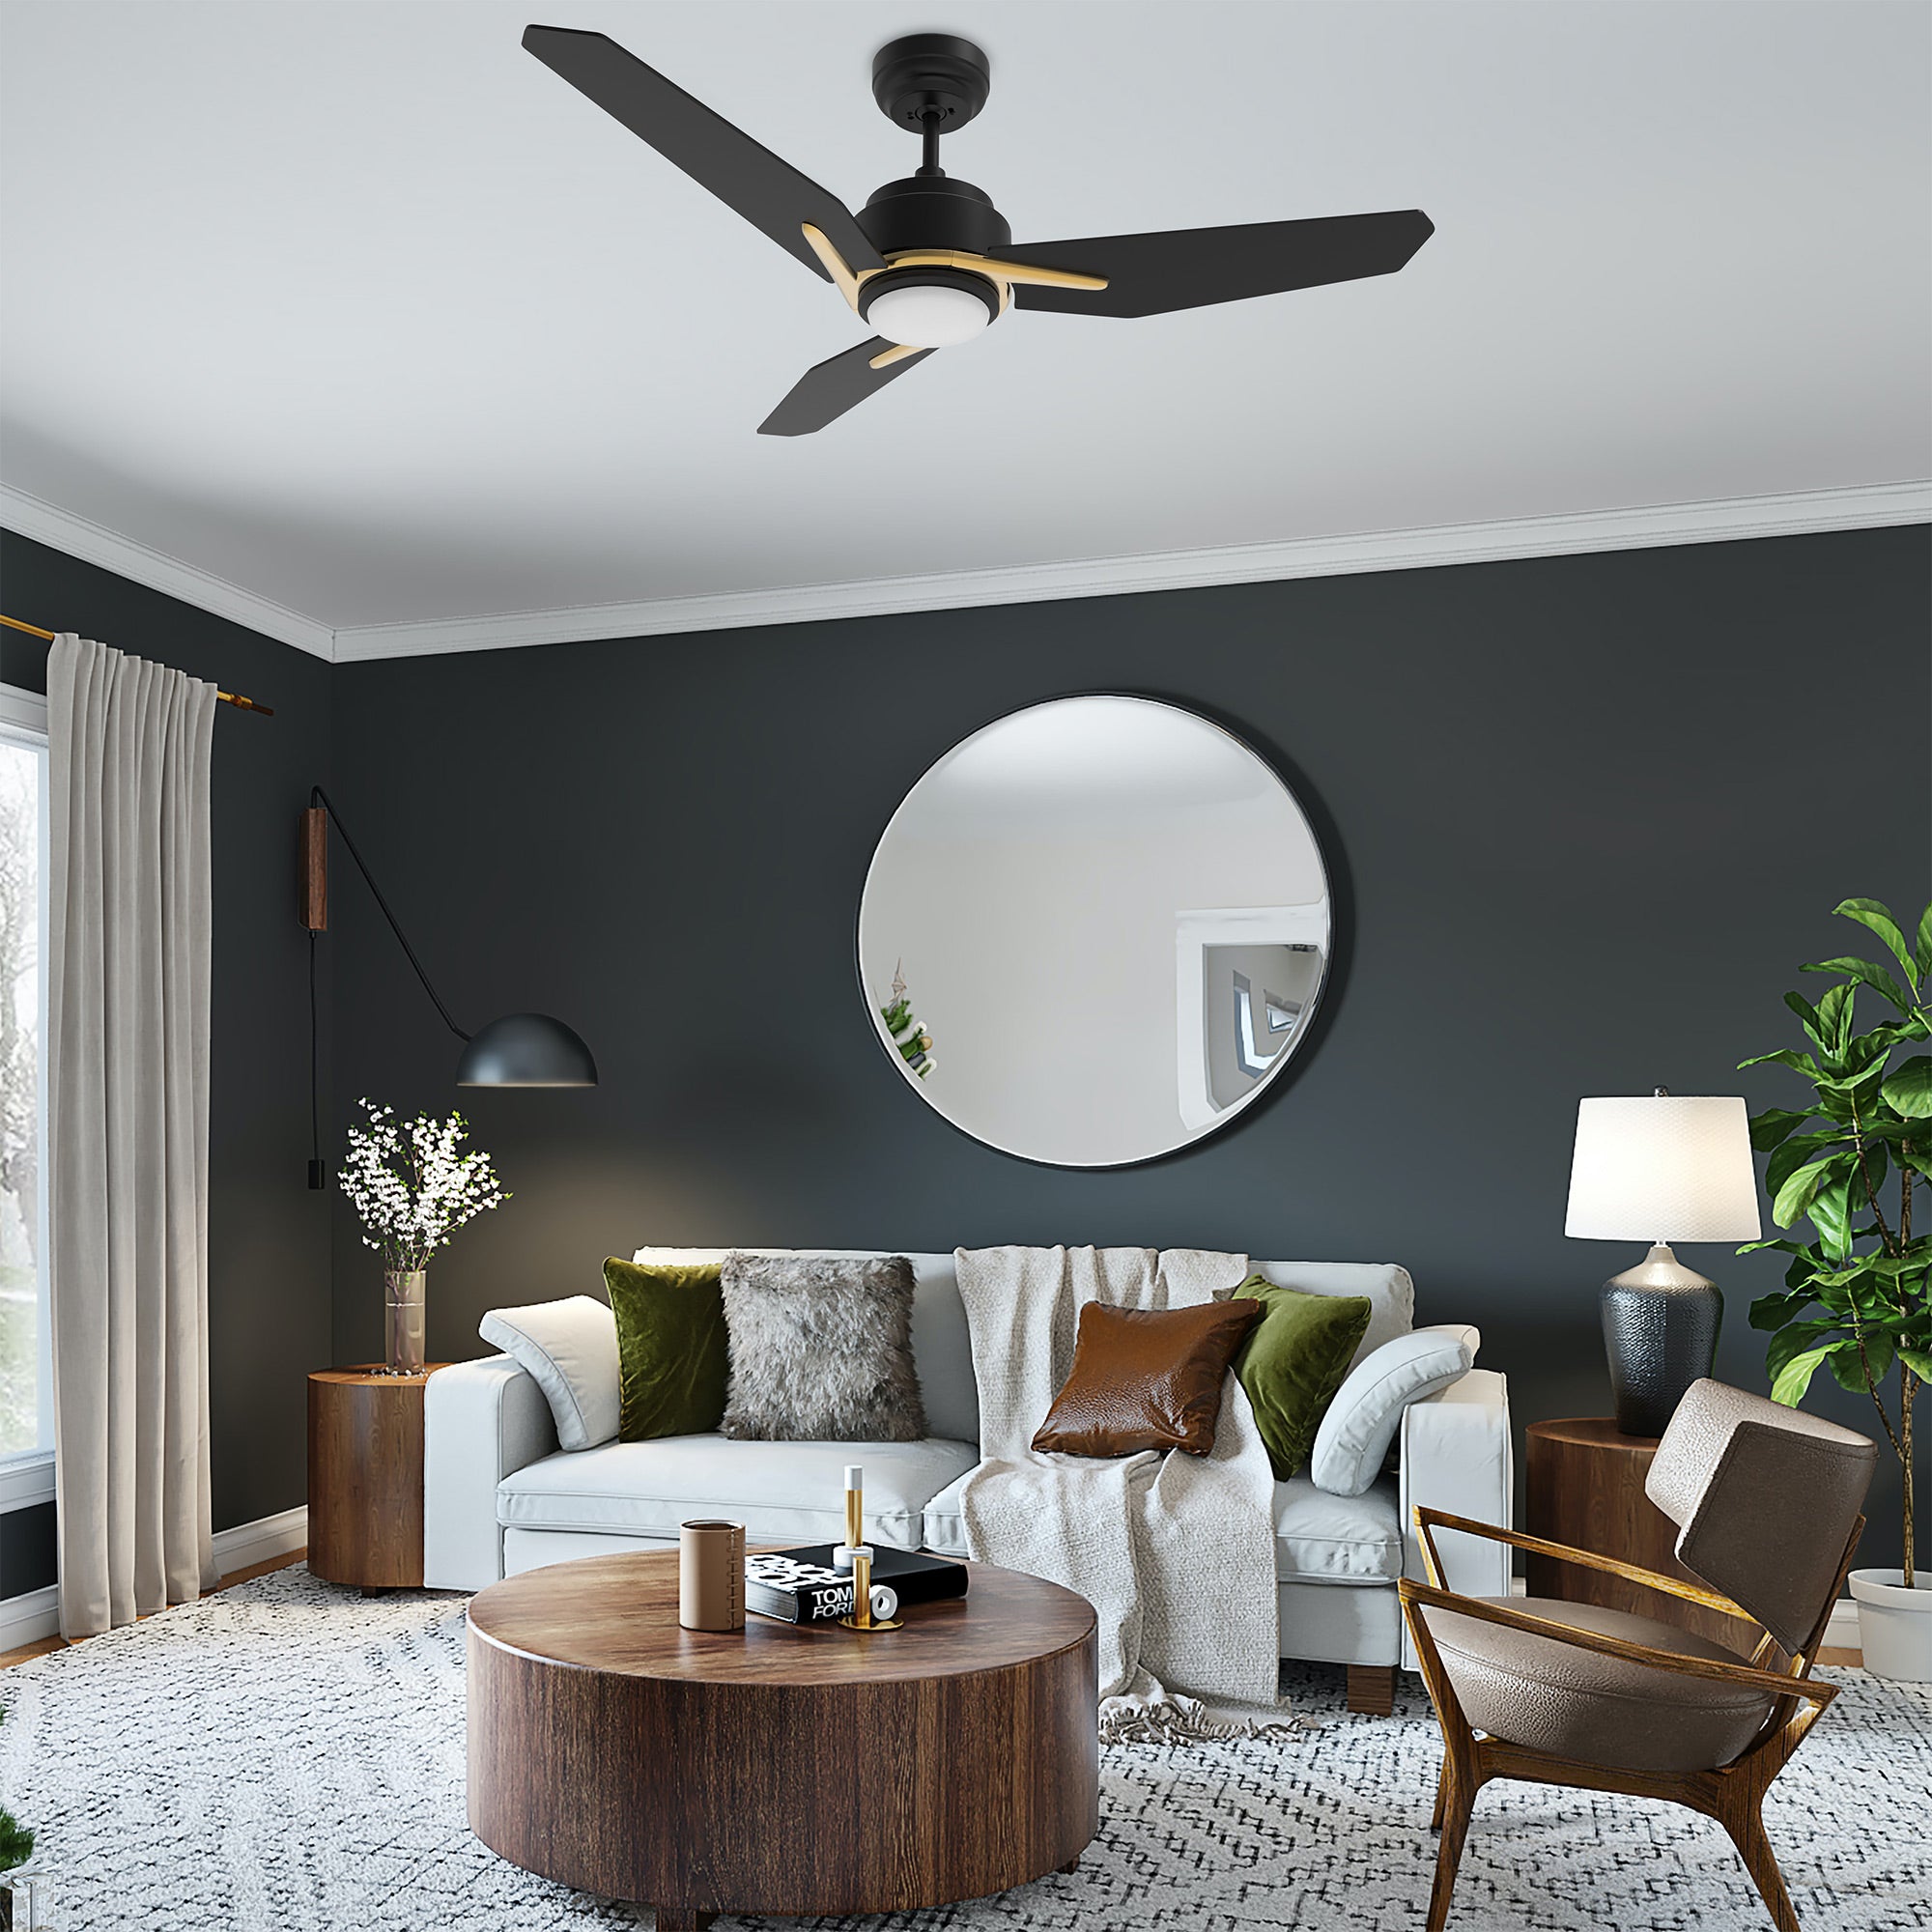 This Tilbury 56&#39;&#39; smart ceiling fan keeps your space cool, bright, and stylish. It is a soft modern masterpiece perfect for your large indoor living spaces. This Wifi smart ceiling fan is a simplicity designing with Black finish, use elegant Plywood blades and has an integrated 4000K LED cool light. The fan features Remote control, Wi-Fi apps, Siri Shortcut and Voice control technology (compatible with Amazon Alexa and Google Home Assistant ) to set fan preferences.